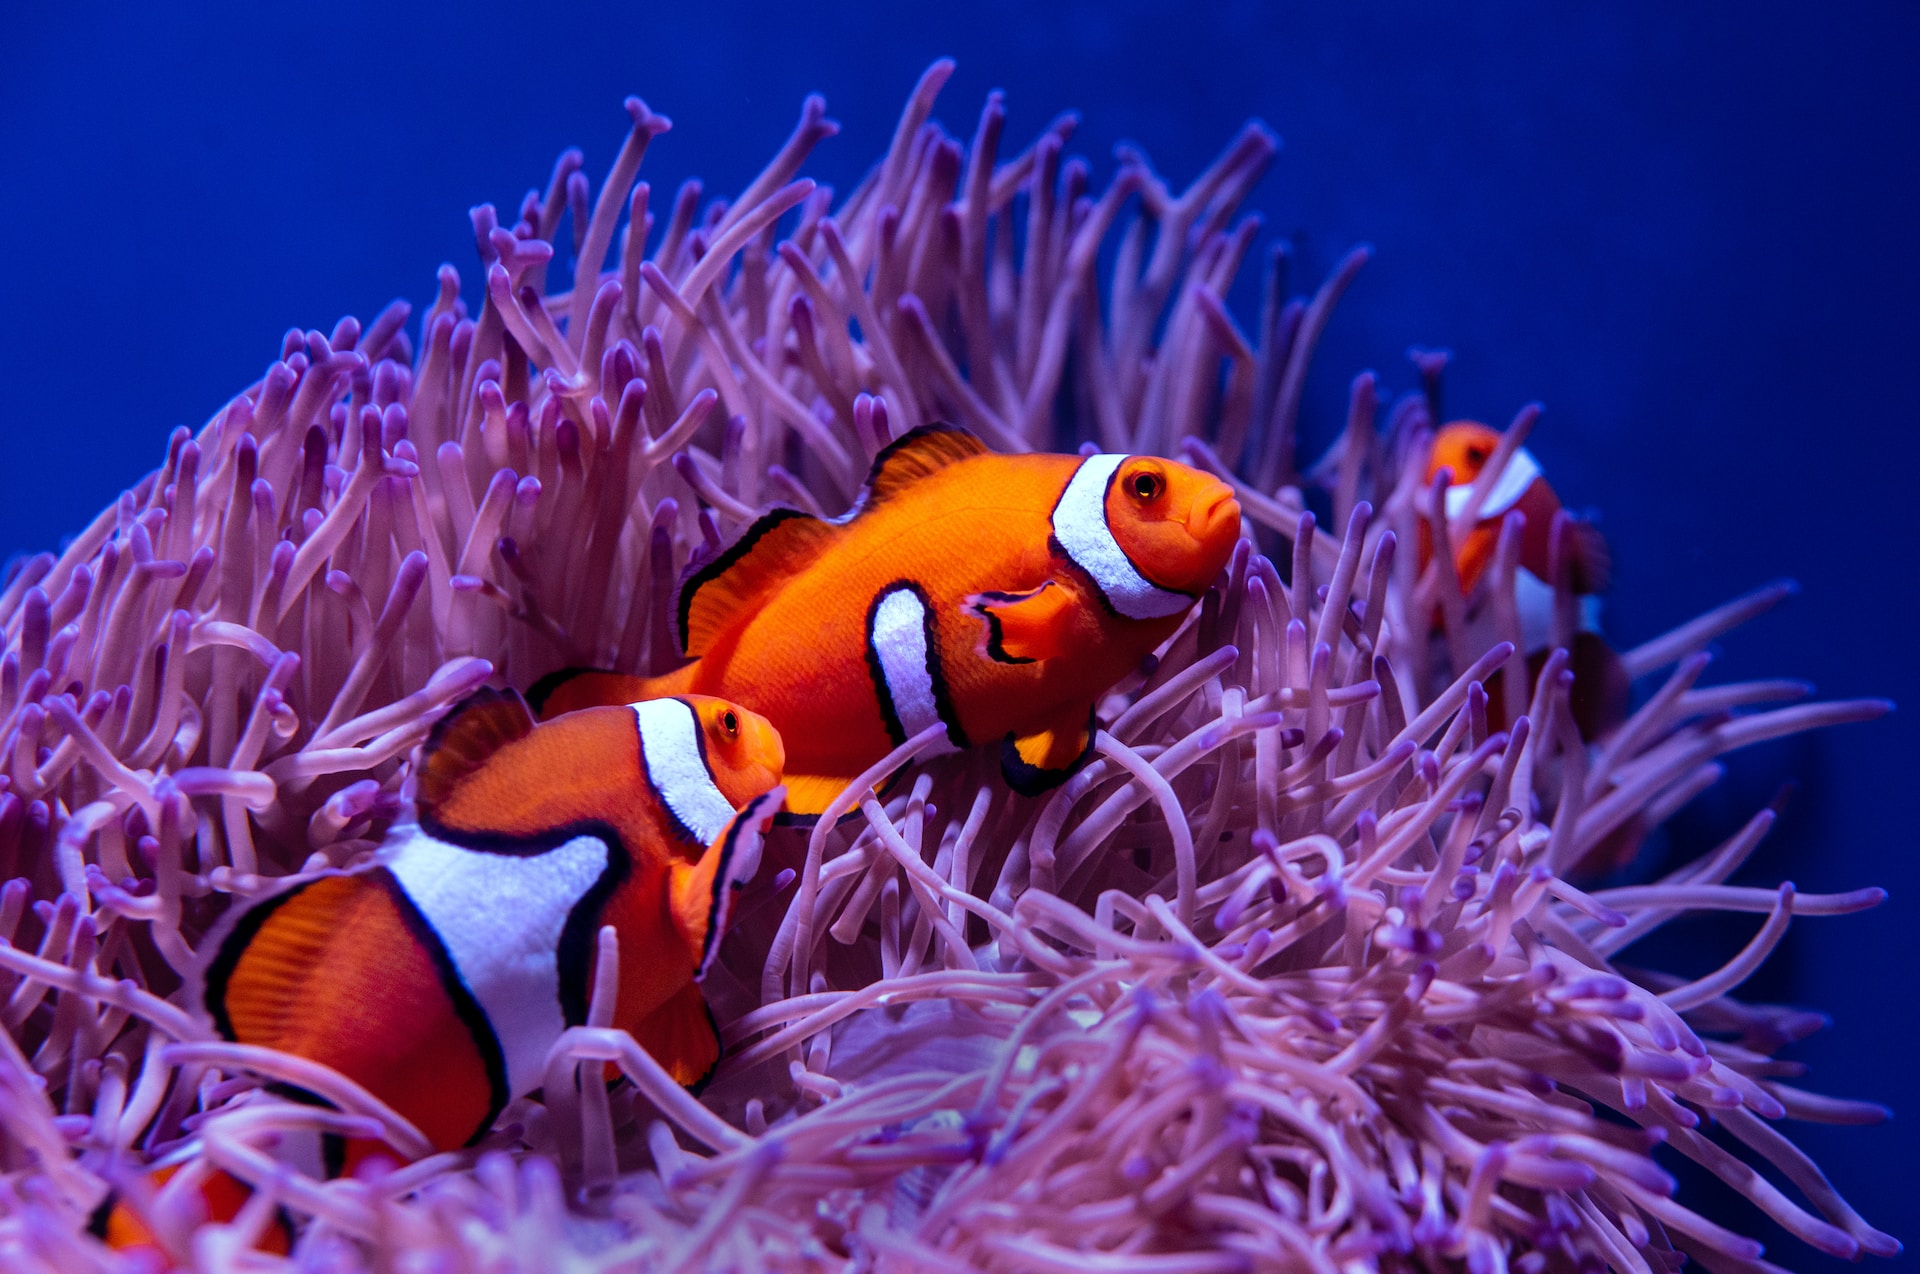 Top 10 Interesting Facts About Coral Reefs You Never Knew